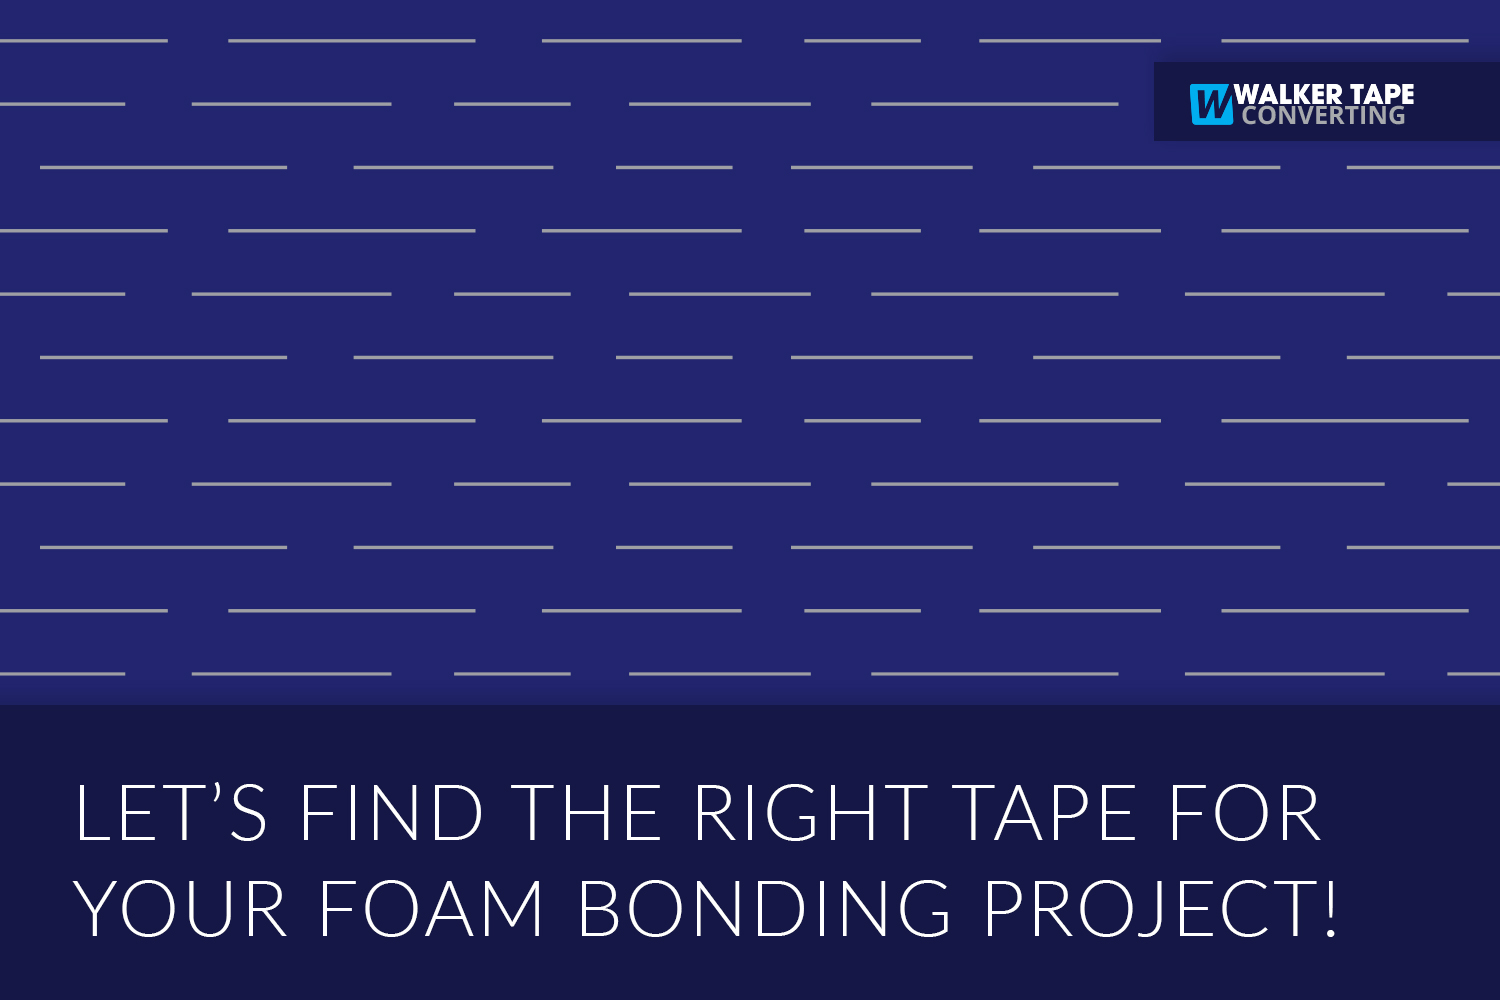 How to Choose the Right Tape For Your Project